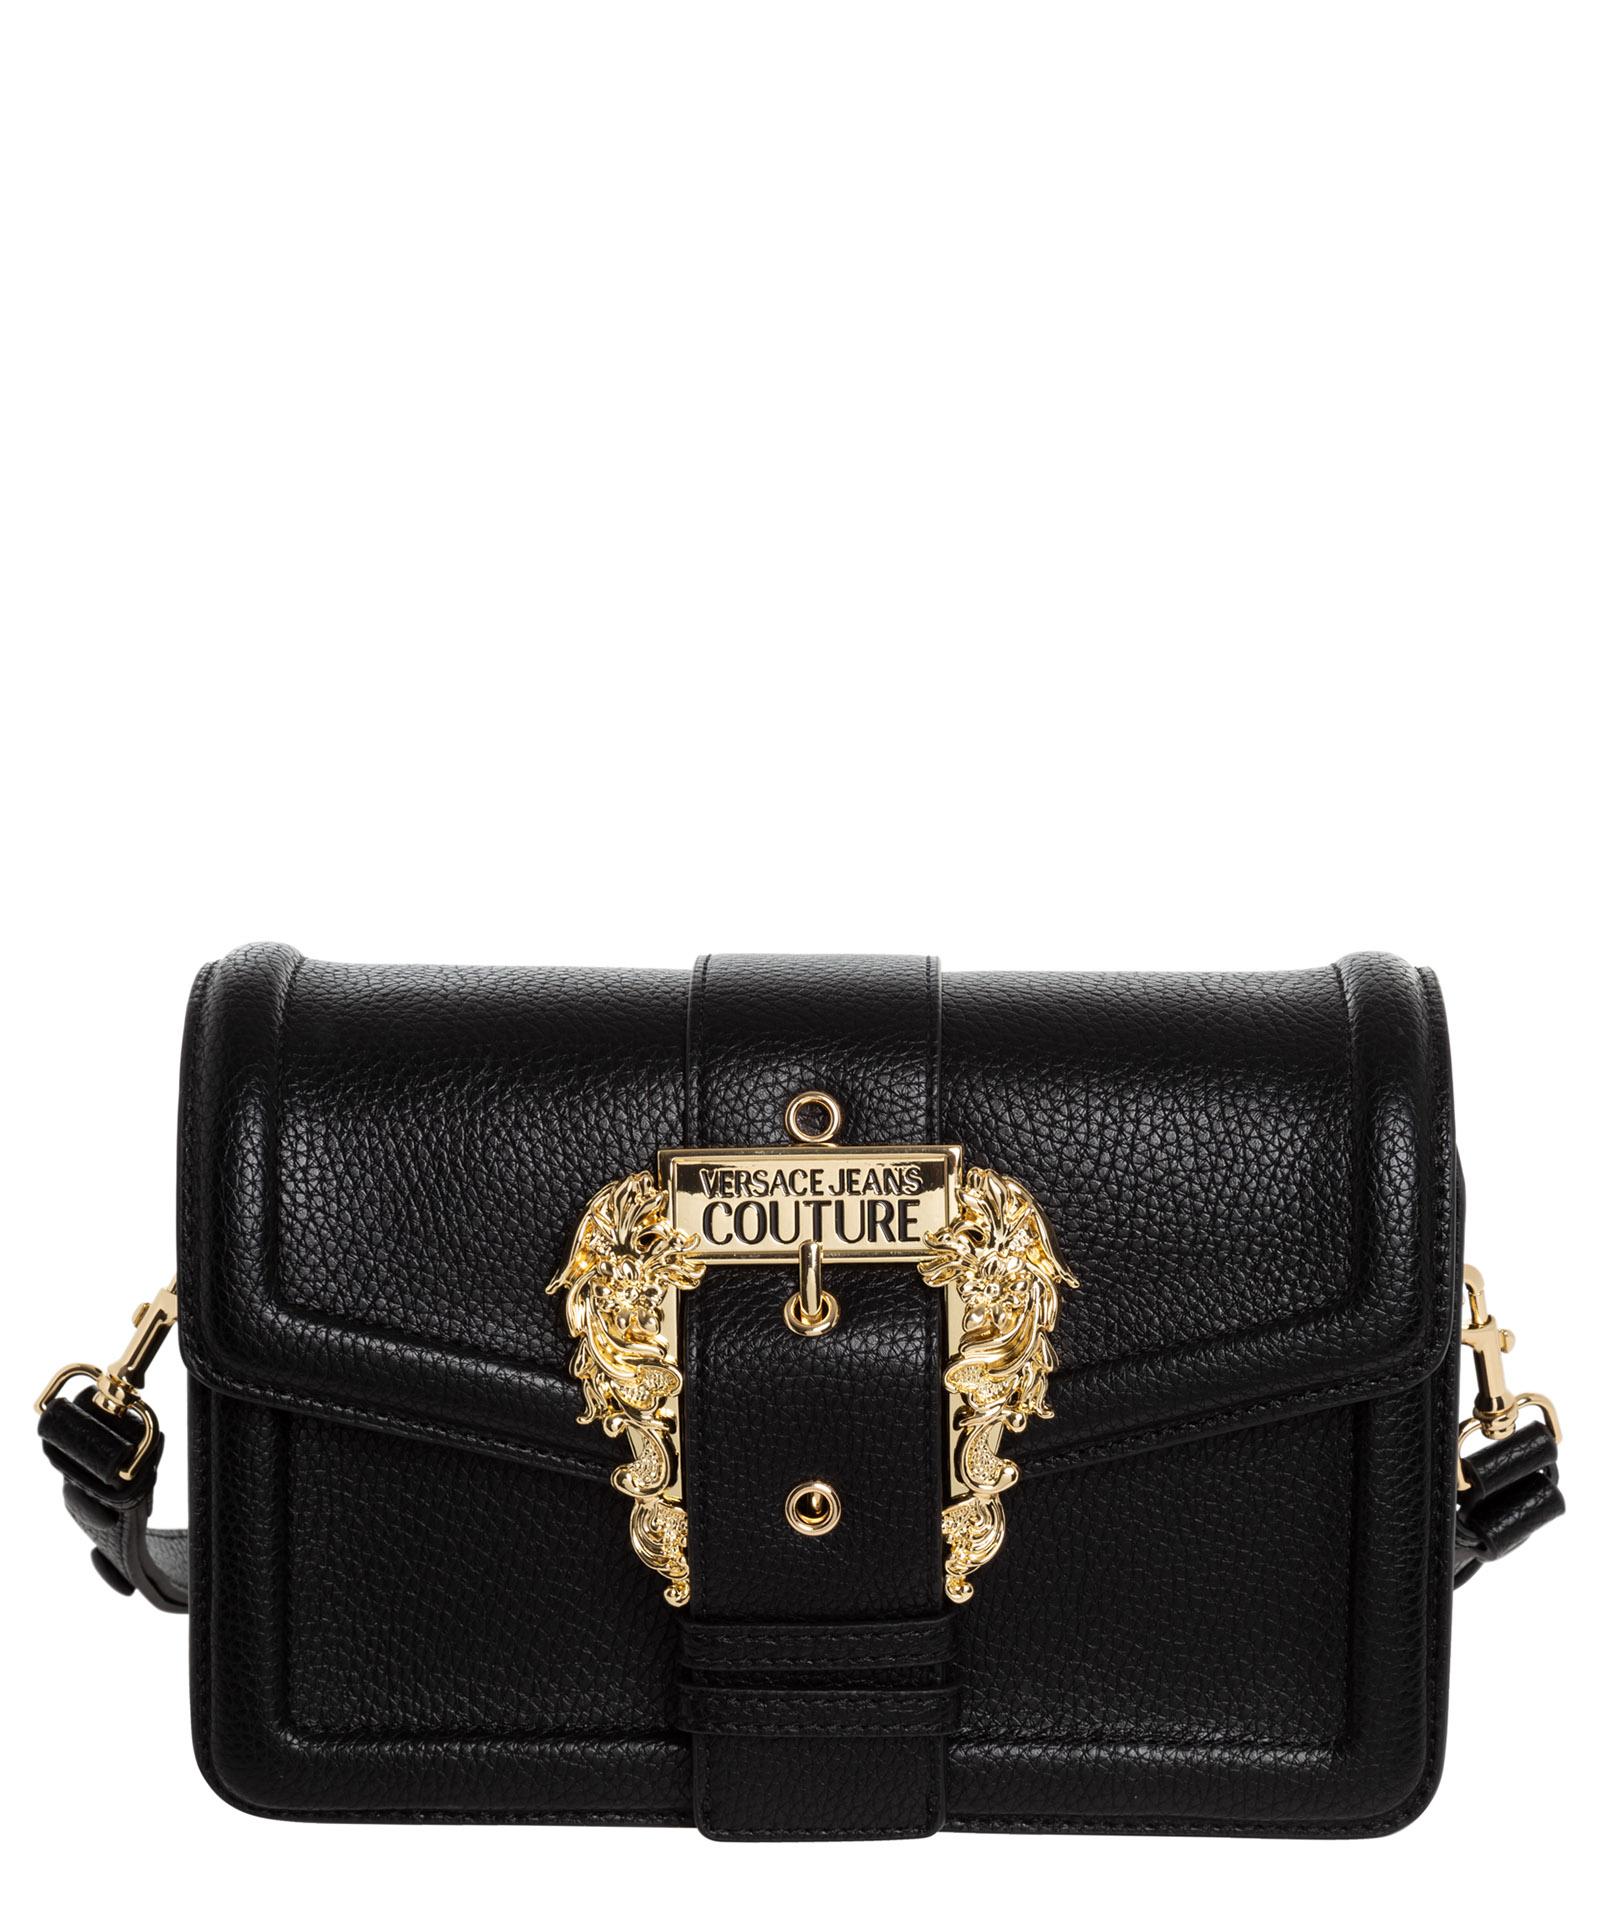 Versace Jeans Couture Couture I Shoulder Bag in Black | Lyst